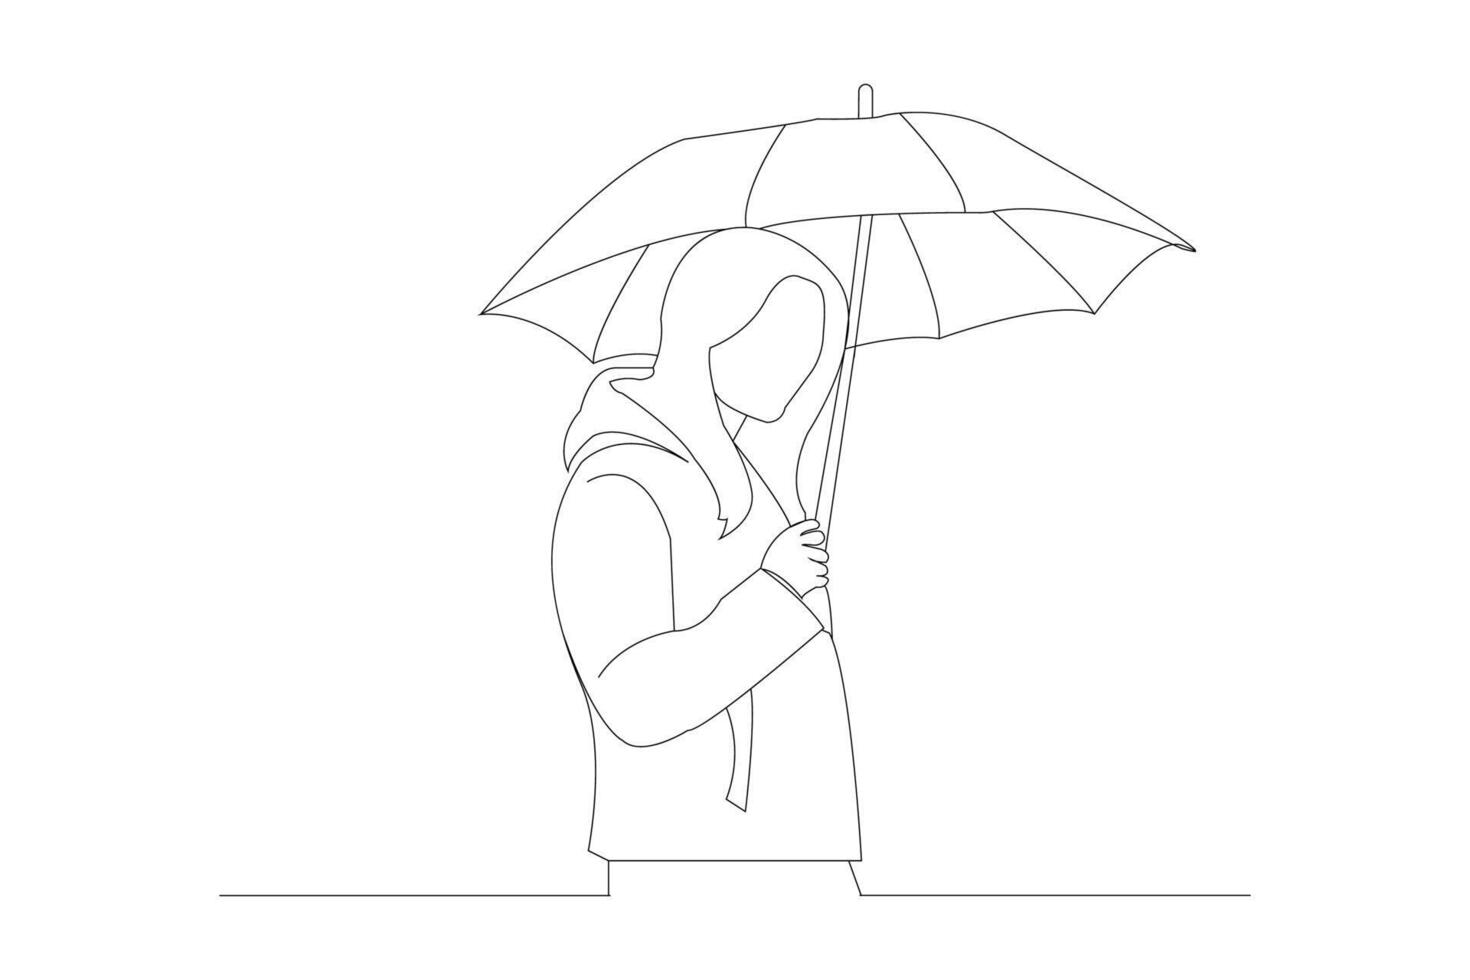 Girl holding umbrella continuous outline vector isolated on white background.